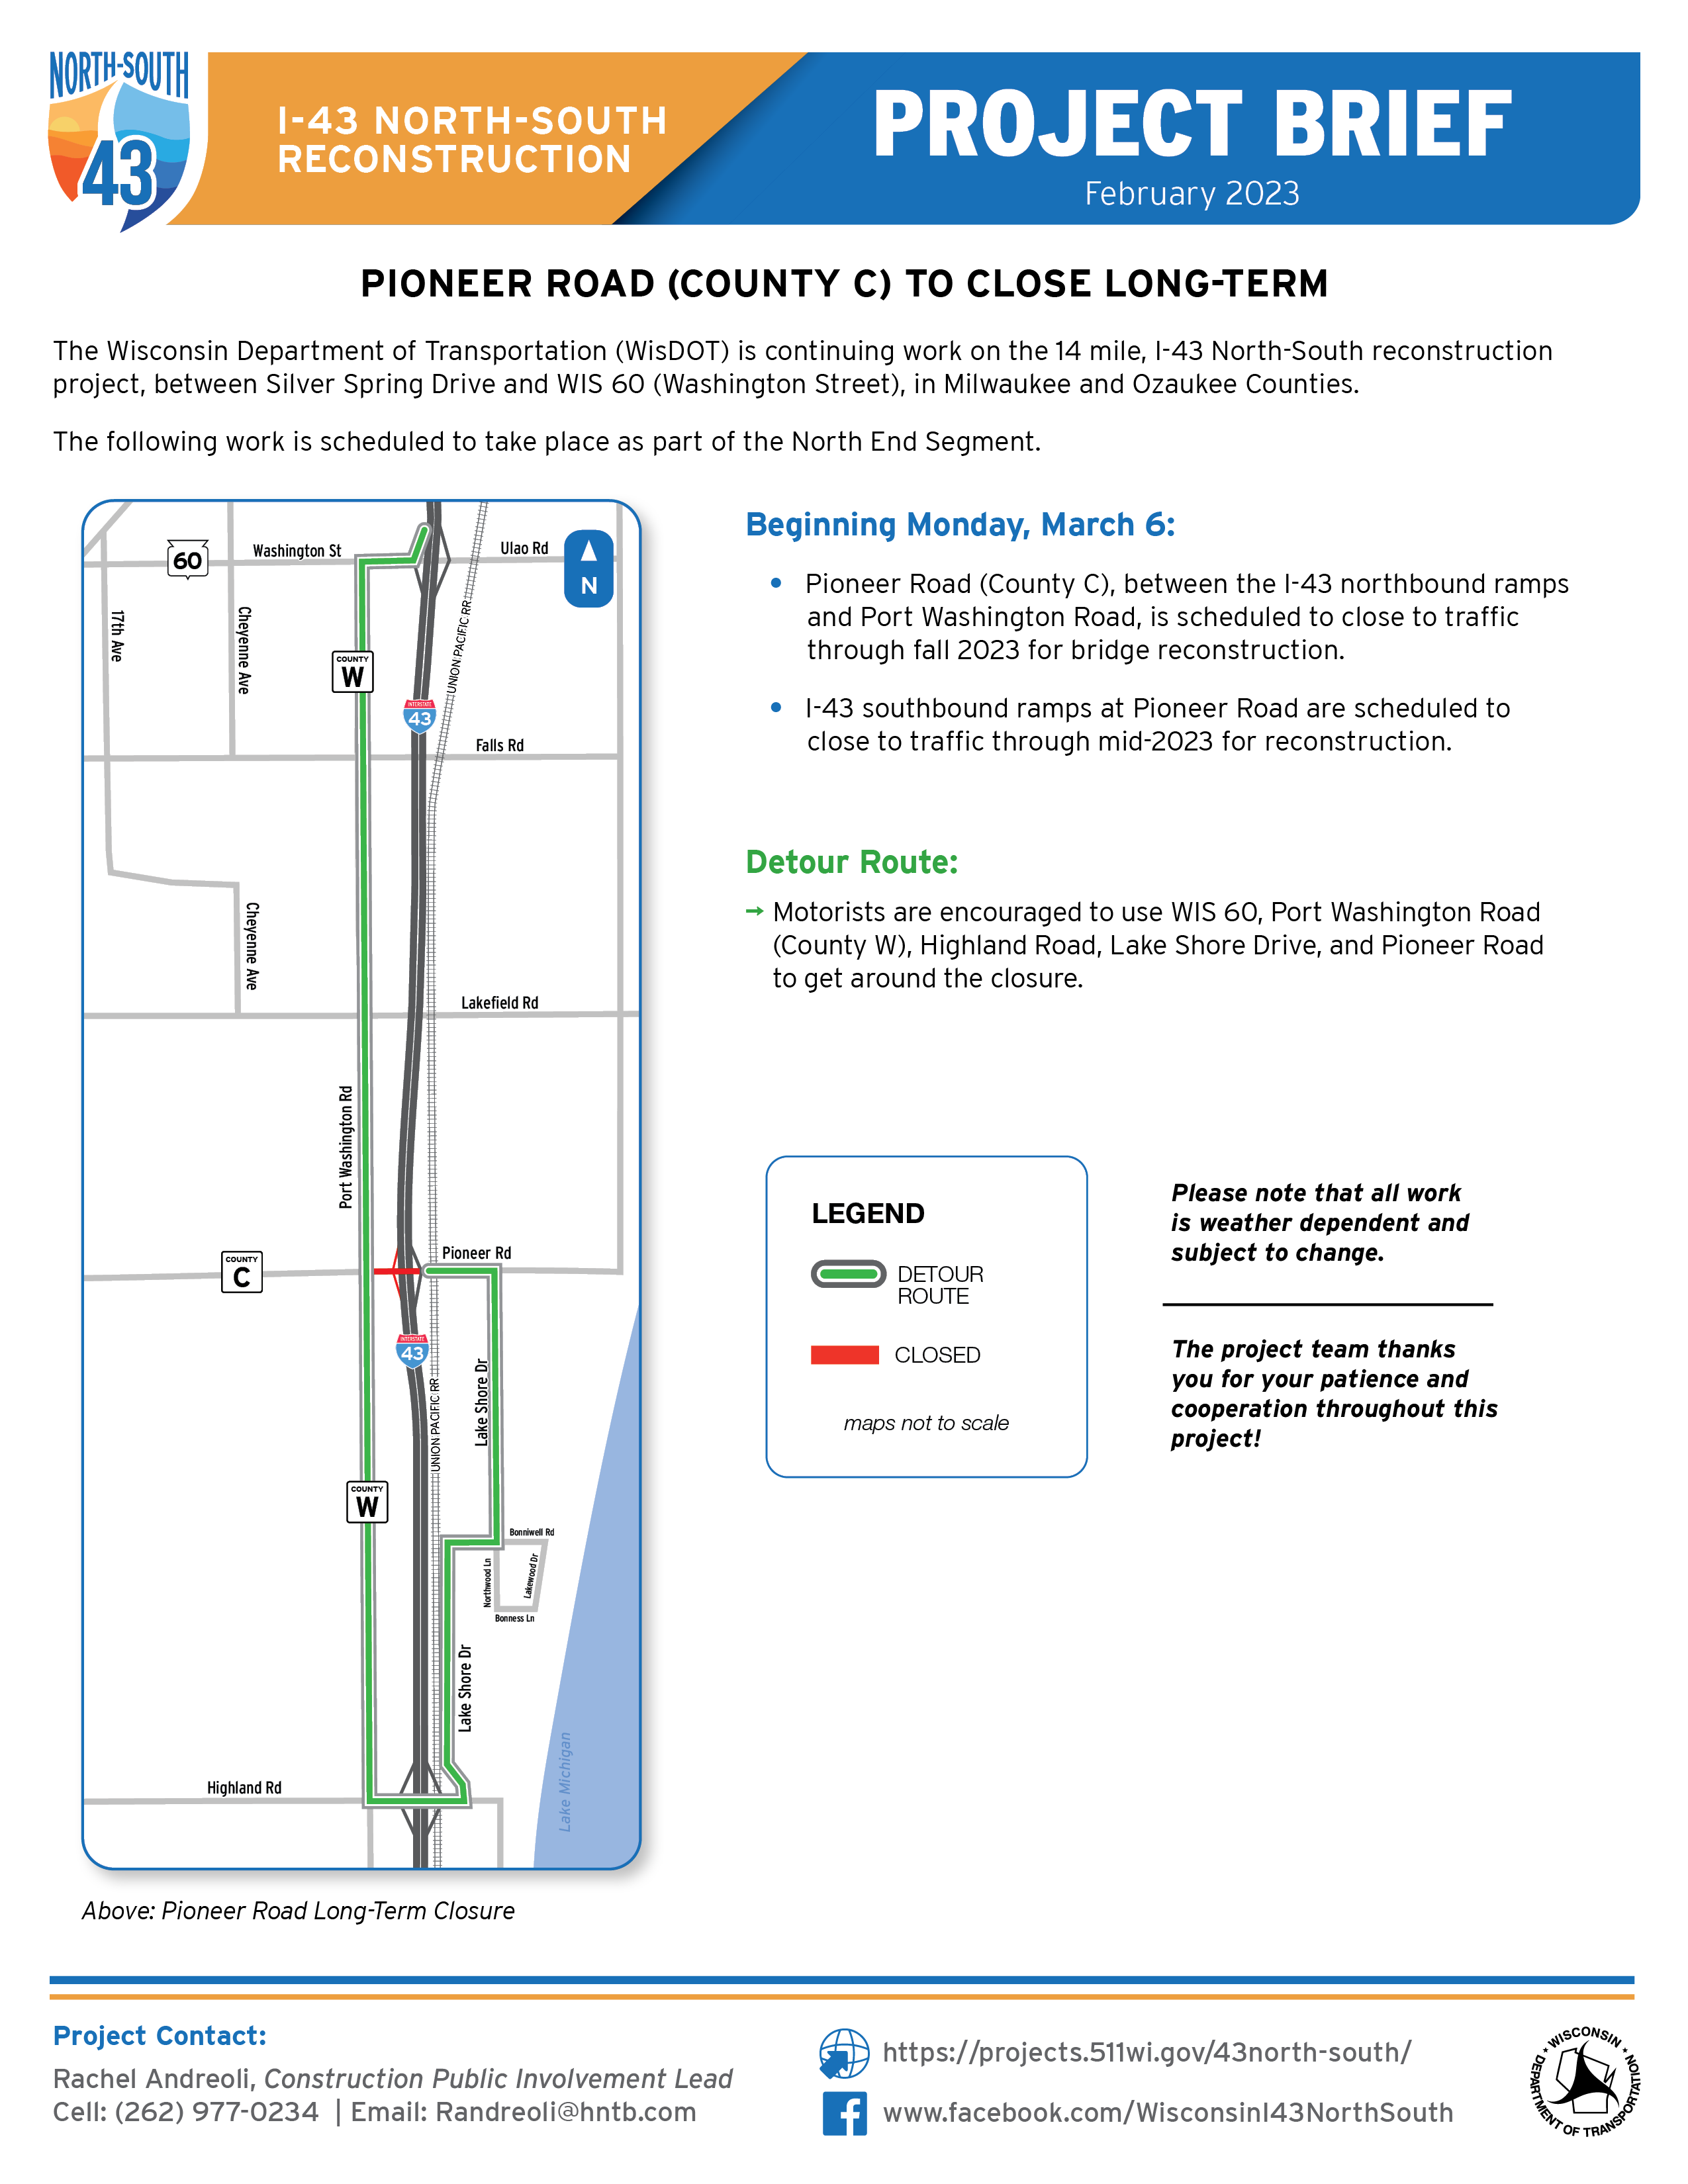 March 6, Pioneer Road (County C) to Close